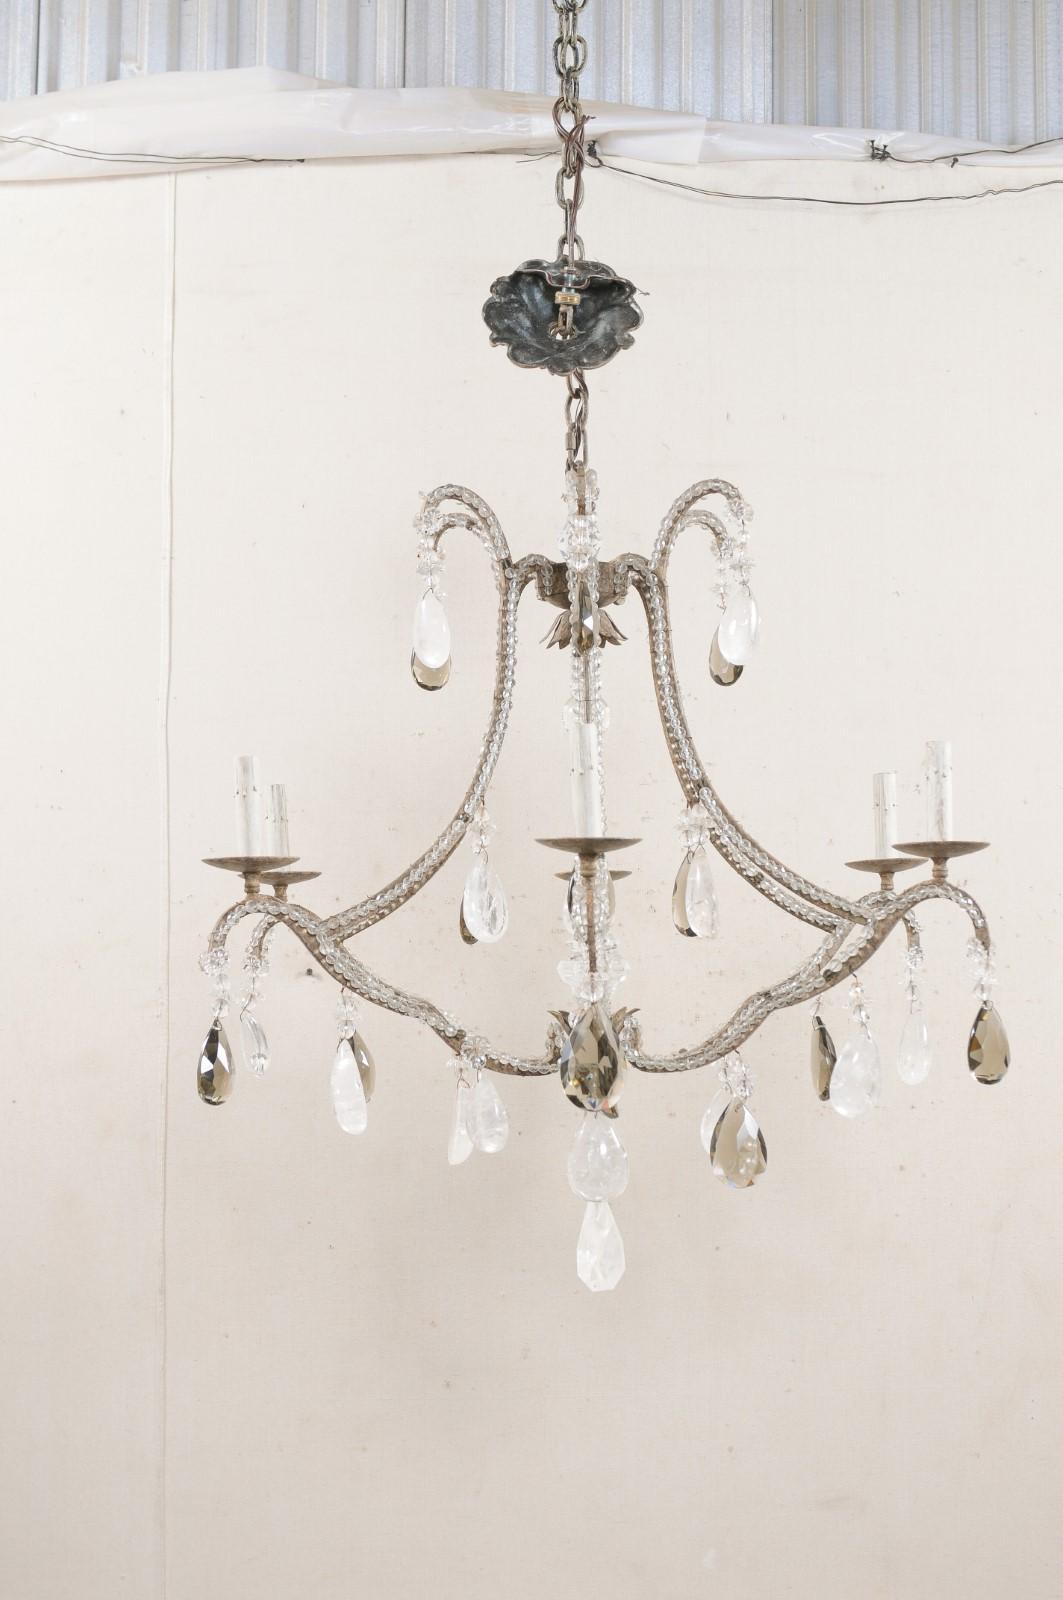 American Vintage Six-Light Chandelier W/Waterfall Top, Adorn in Smoky & Rock Crystals For Sale